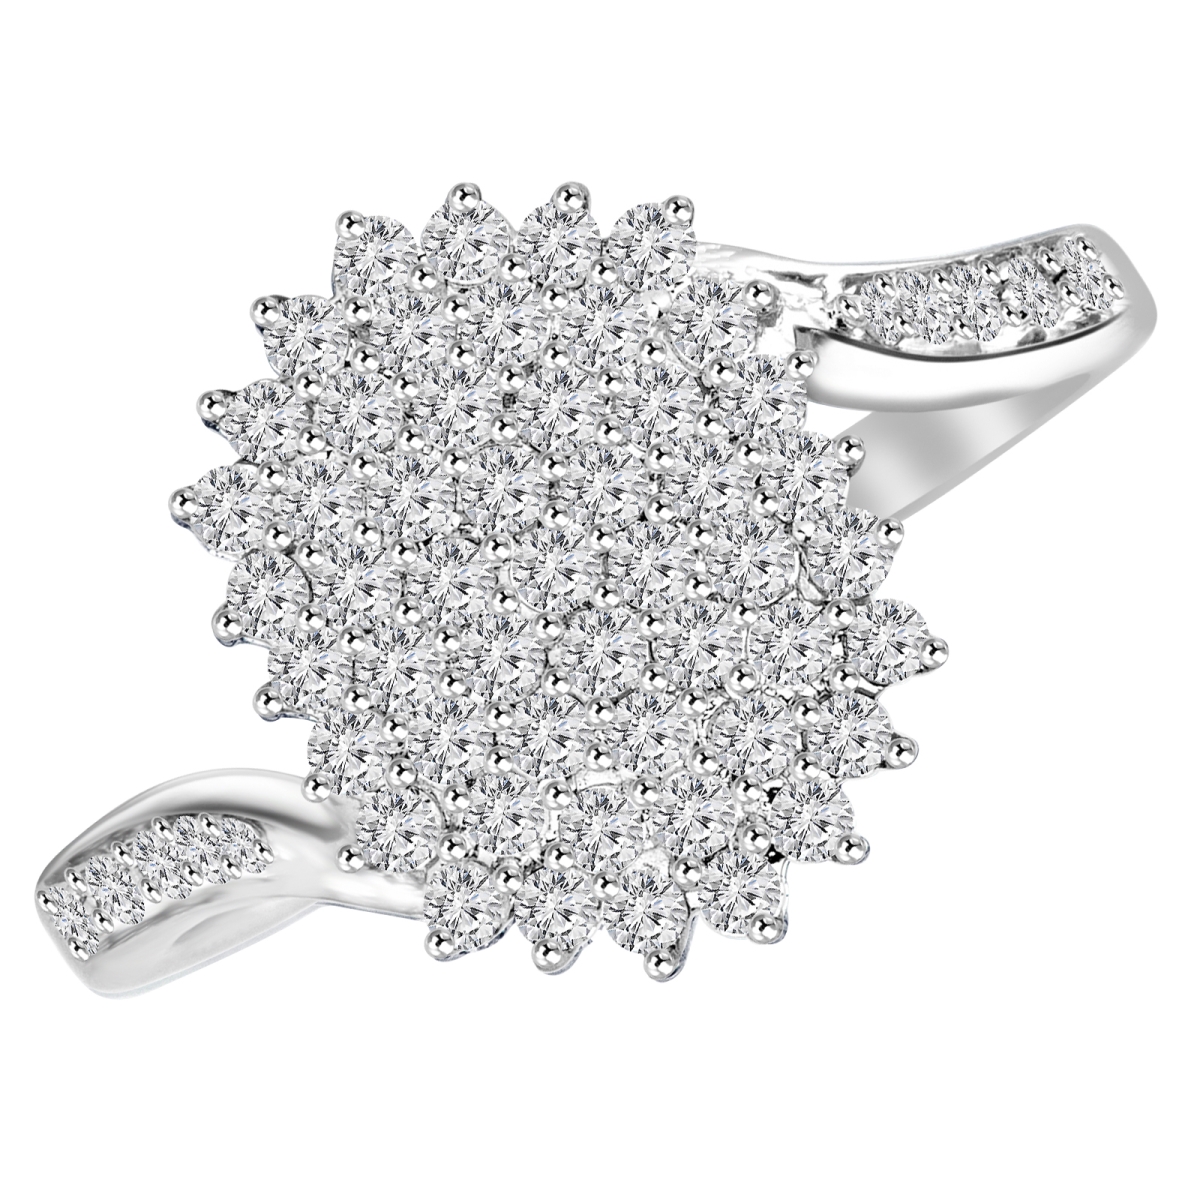 Picture of Majesty Diamonds MDR160007-8.75 0.5 CTW Round Diamond Cluster Cocktail Ring in 14K White Gold - 8.75